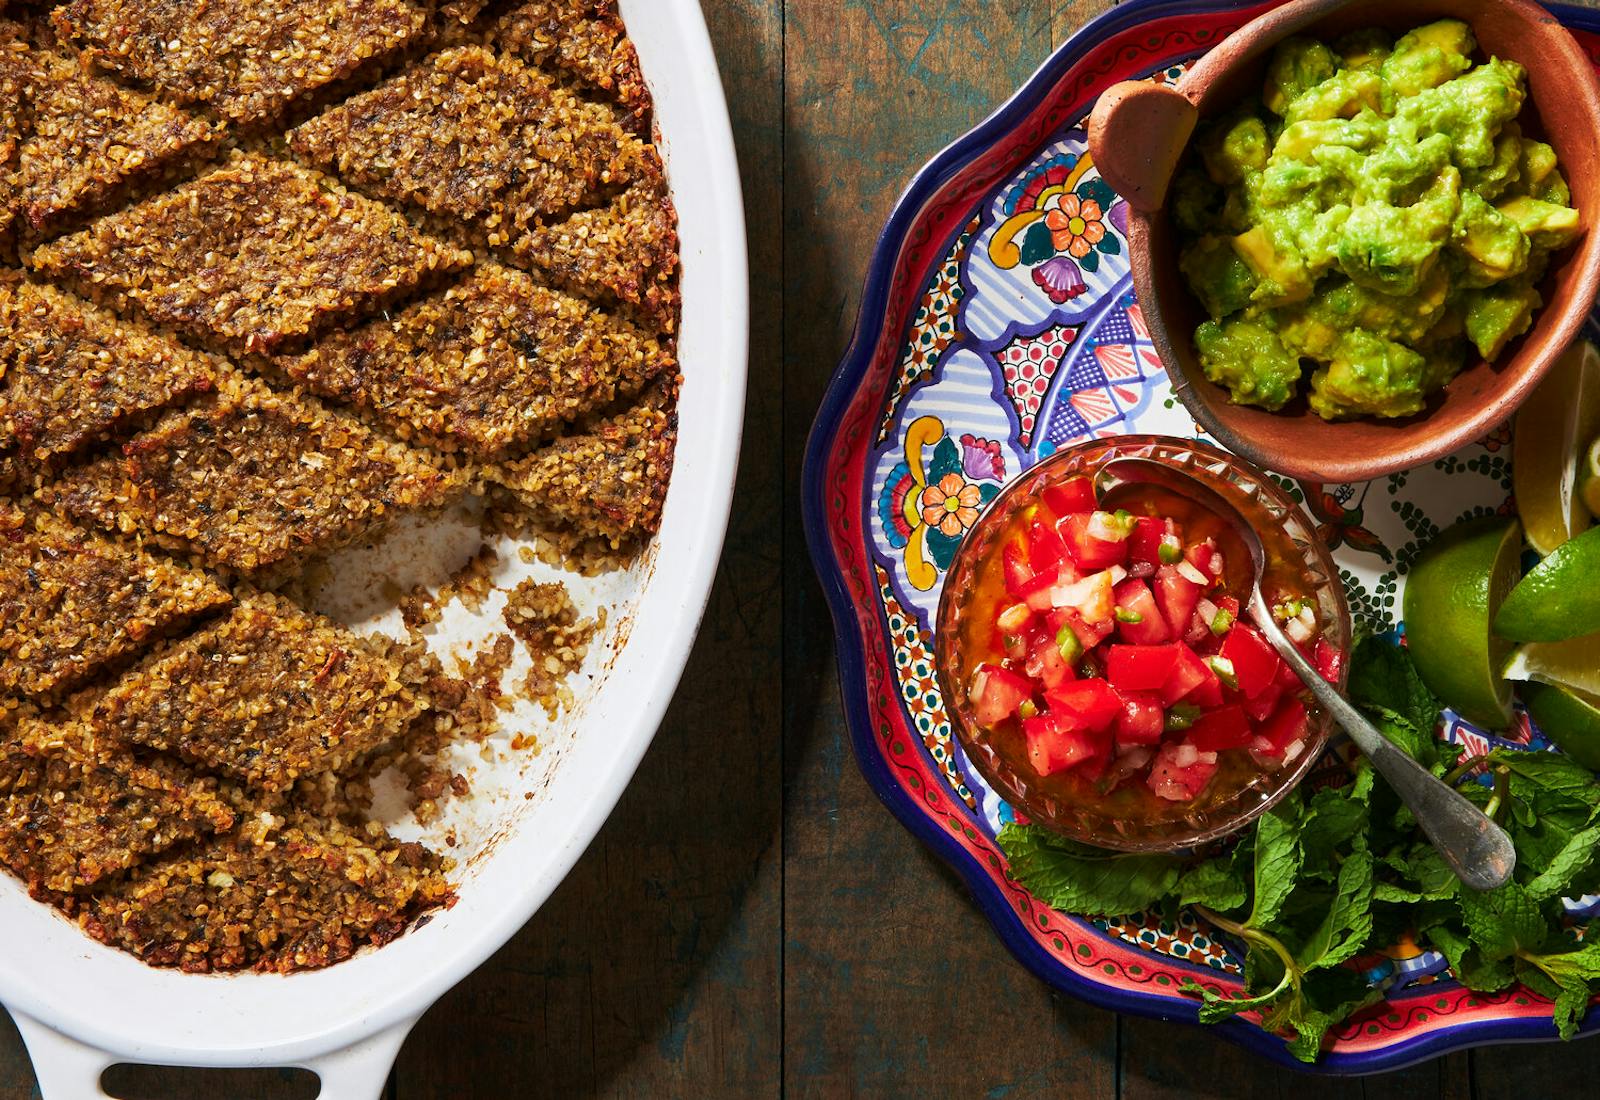 Baked kibbeh in white oval-shaped casserole dish alongside plate of fresh salsa and guacamole.